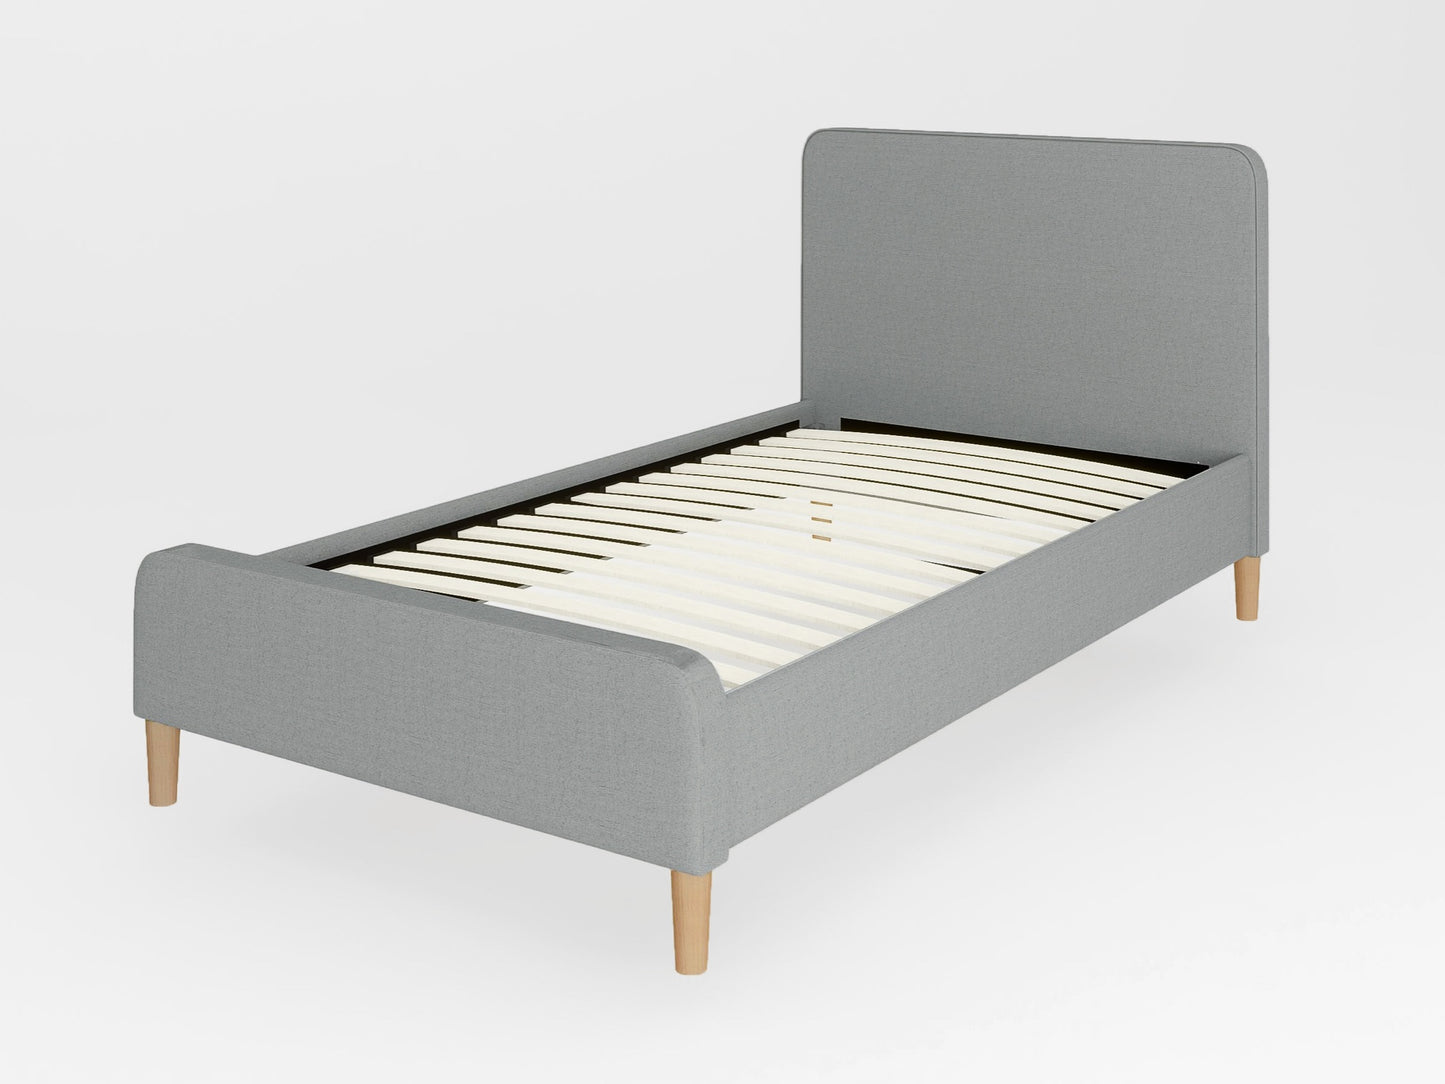 the tailored bed frame